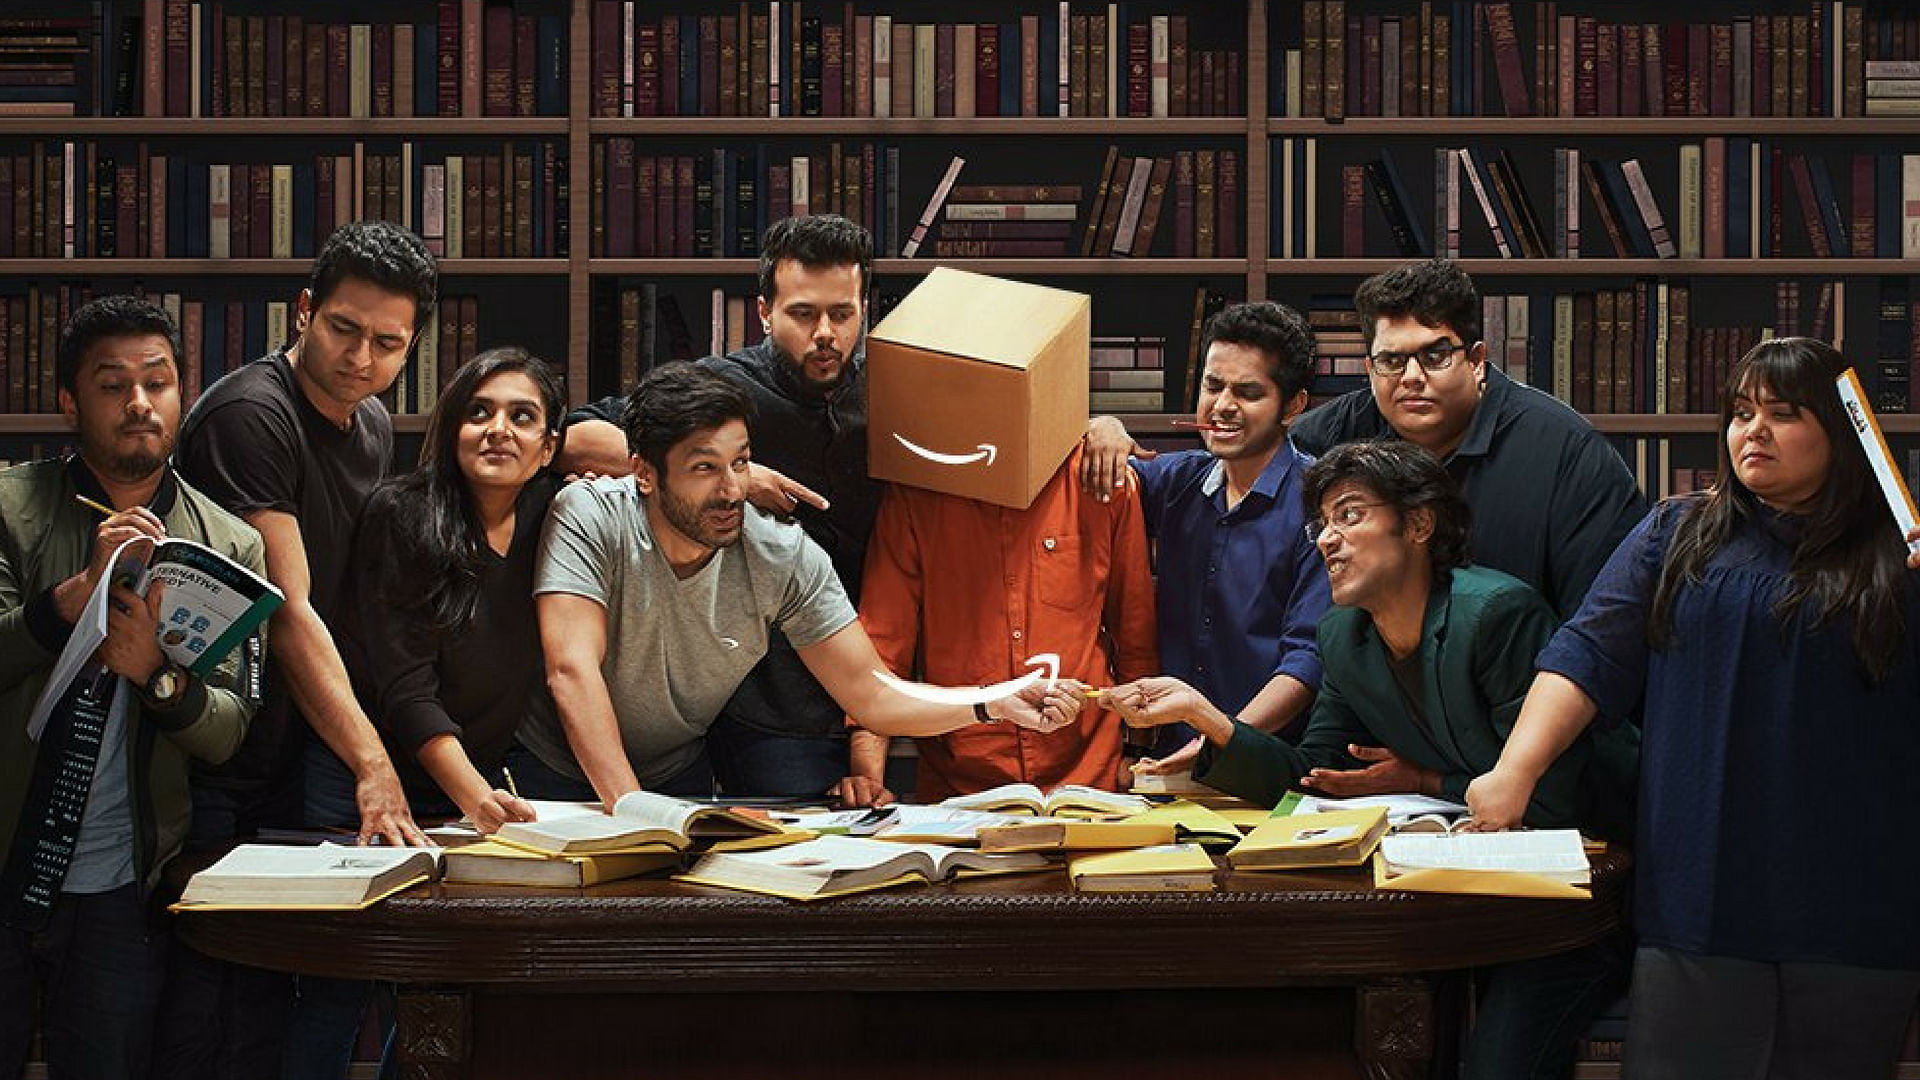 With shows such as Comicstaan, Indian stand-up comedy has found its place under the sun.